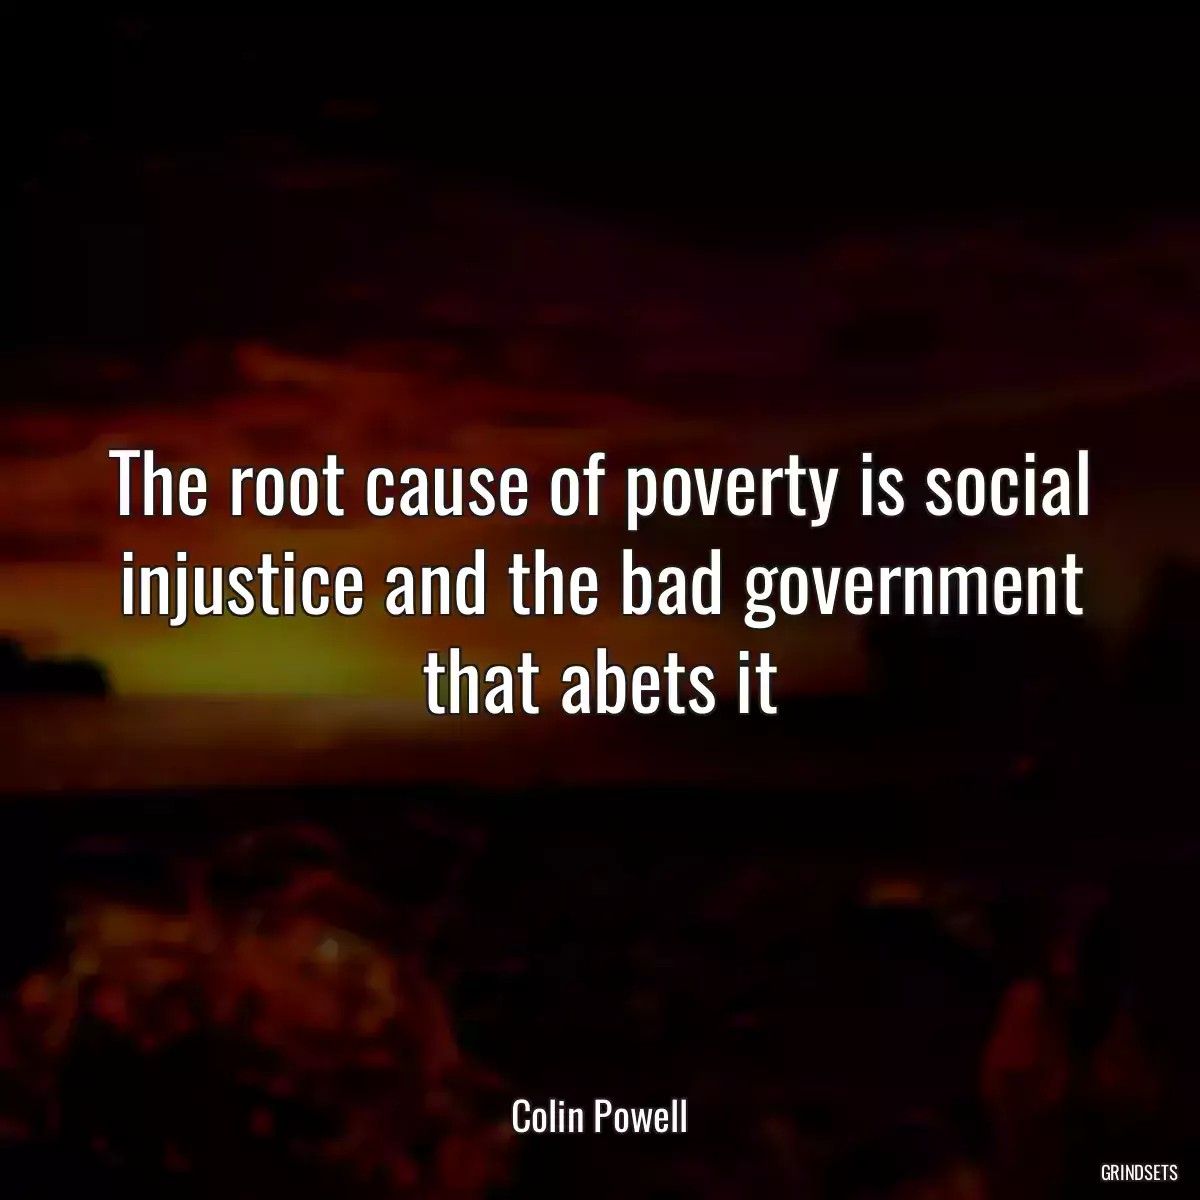 The root cause of poverty is social injustice and the bad government that abets it